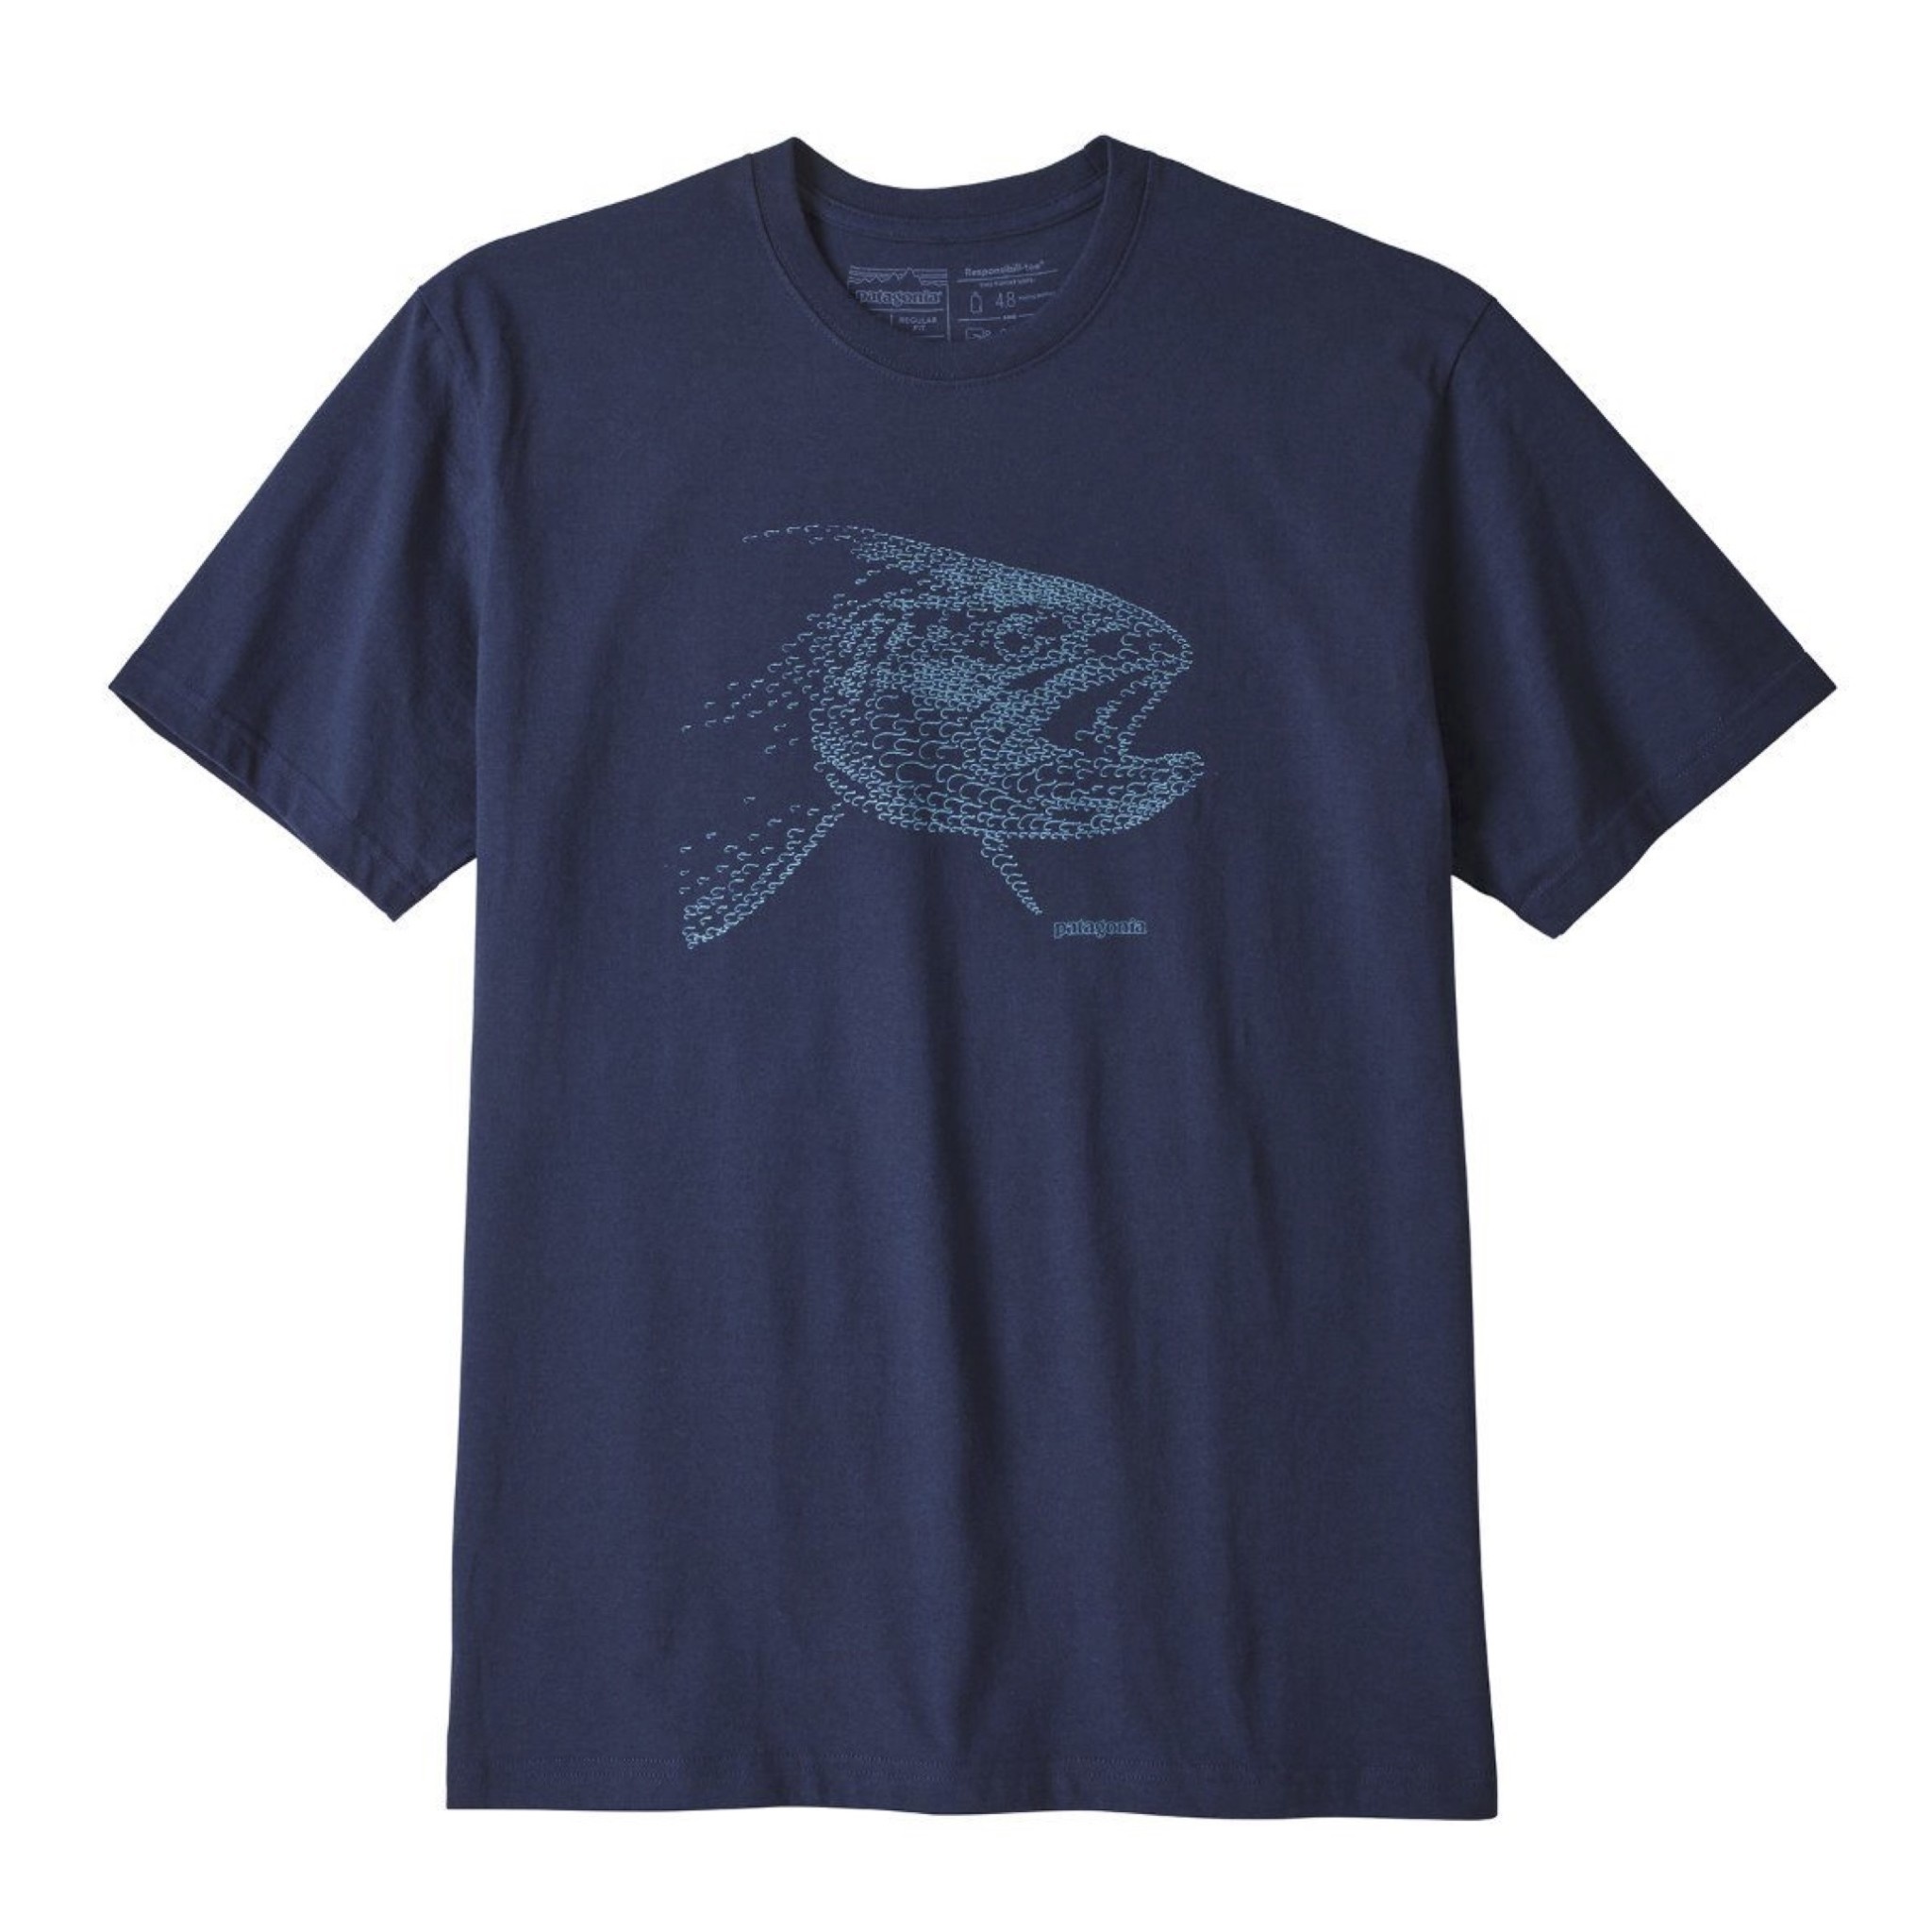 Patagonia M's Hooked Head Responsibili-Tee - Classic Navy w/ Trout - XL